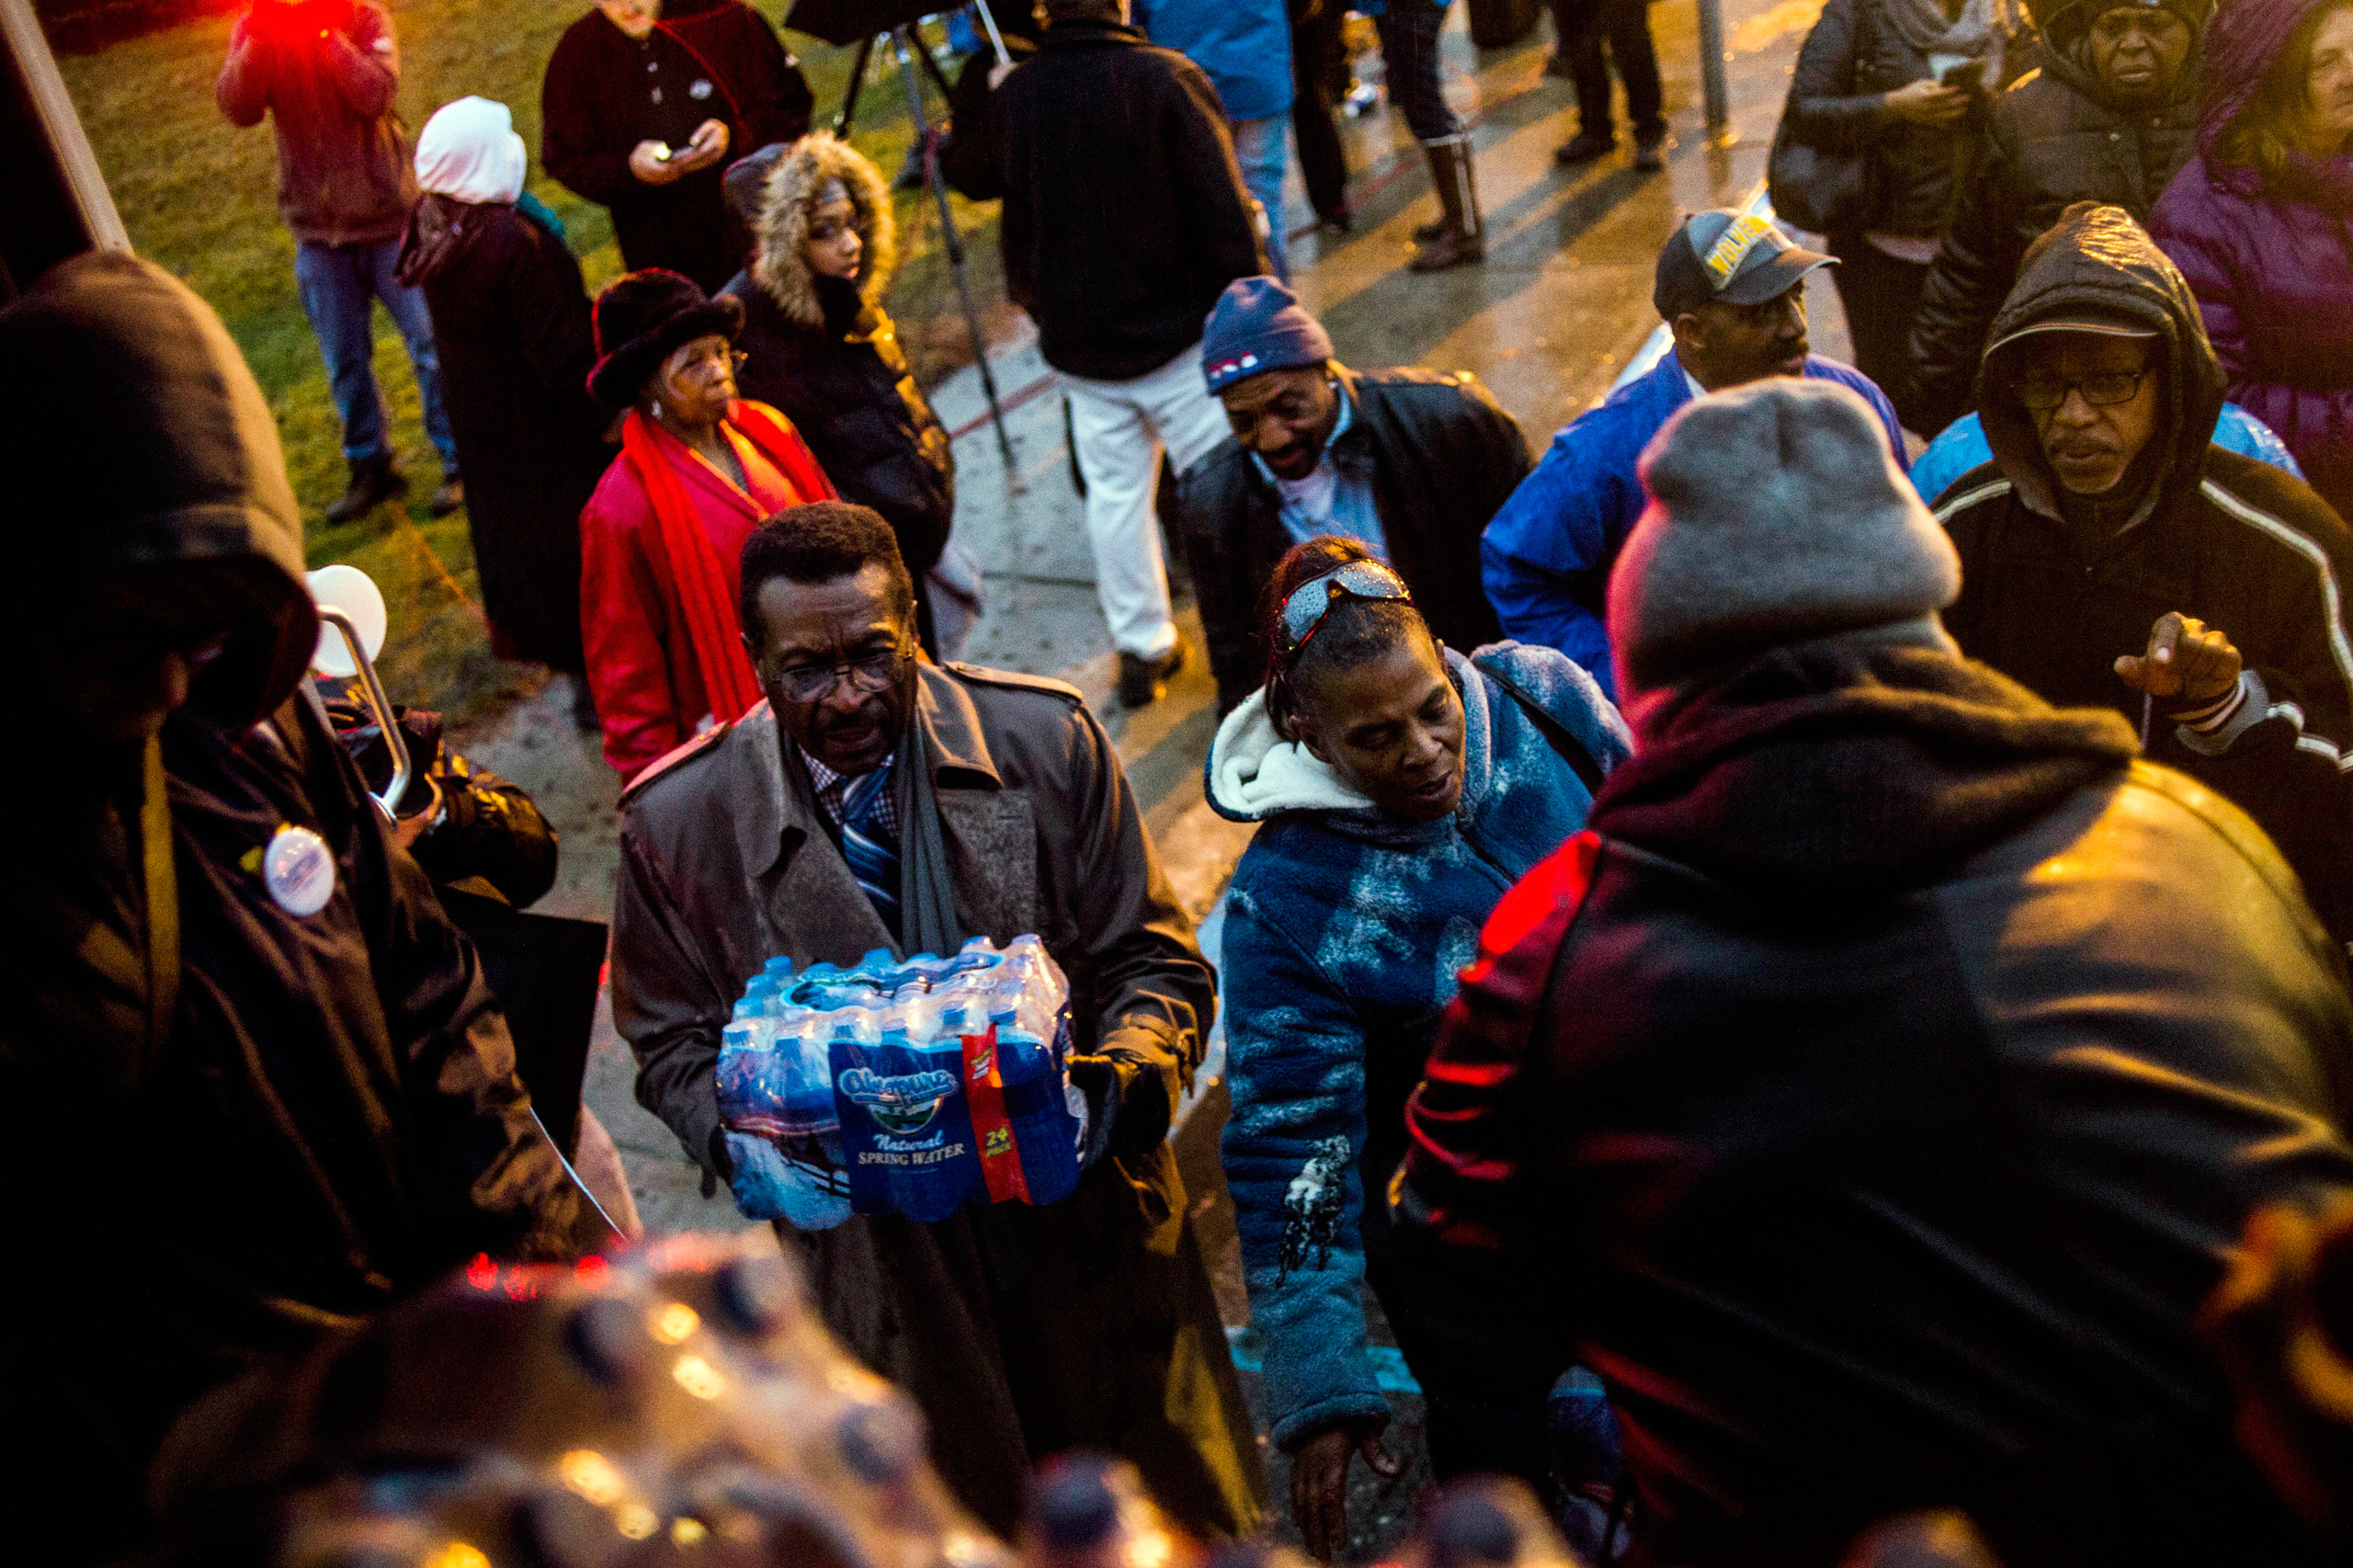 Flint residents line up for free bottled water as activists protest outside of City Hall to protest Michigan Gov. Rick Snyder's handling of the water crisis in Flint, Mich., on Jan. 8, 2016. (Jake May—The Flint Journal-MLive.com/AP)